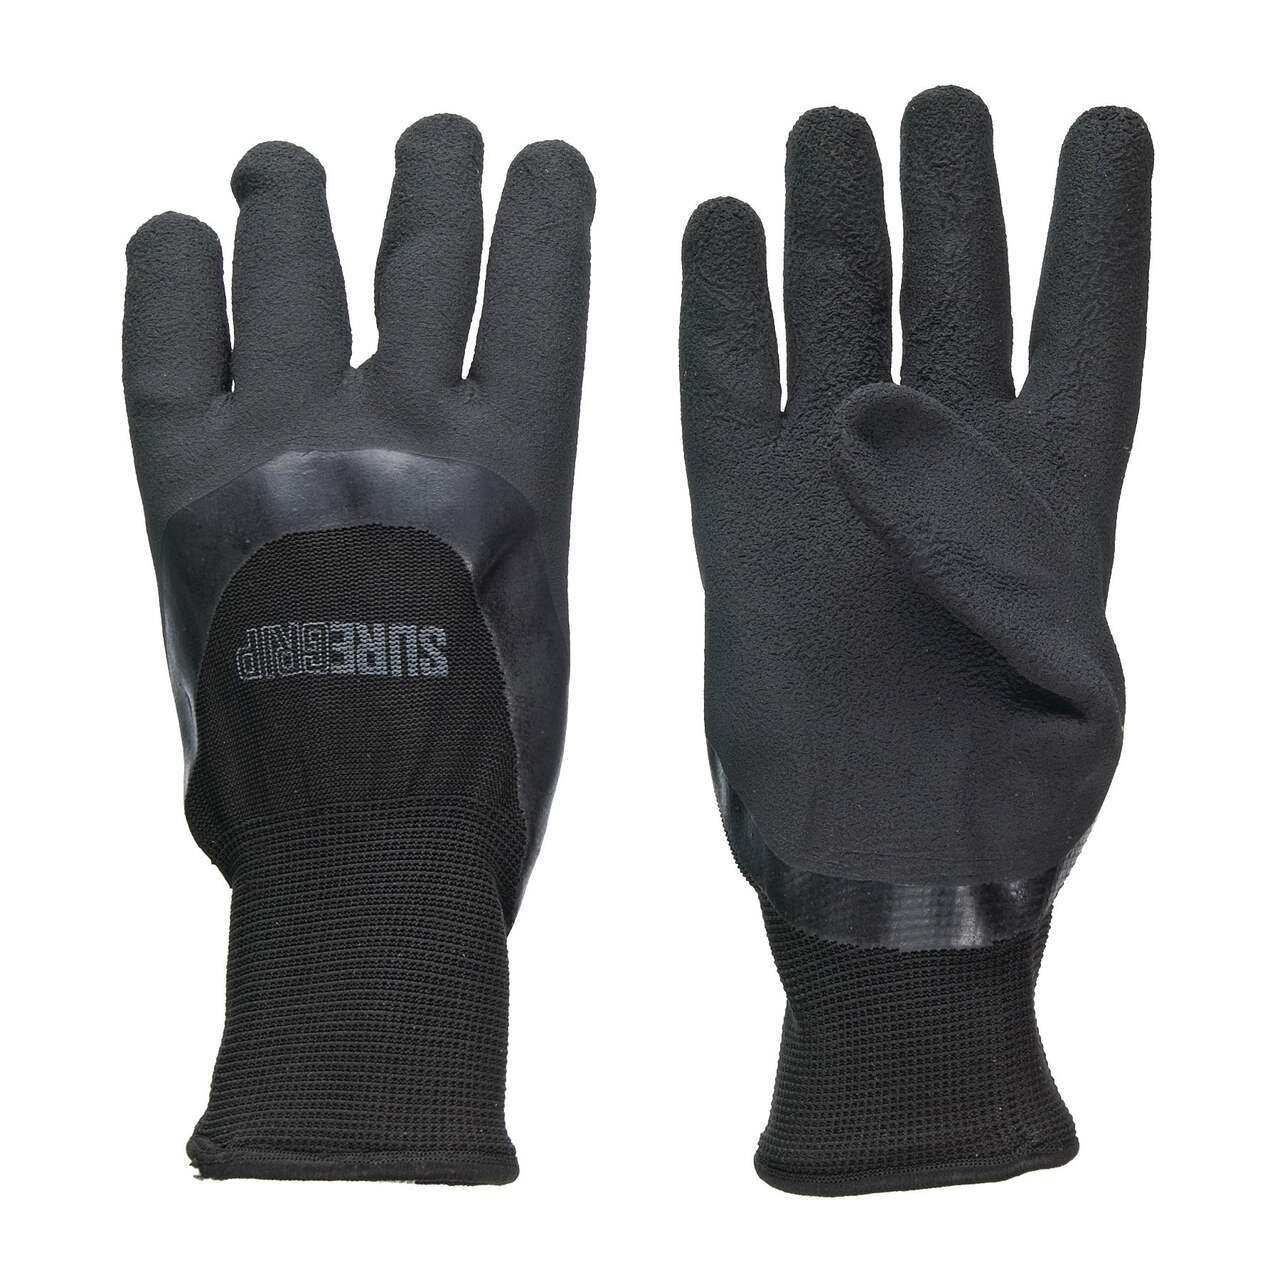 Forcefield Fleece-Lined Rubber Palm Unisex Work Gloves, Large/X